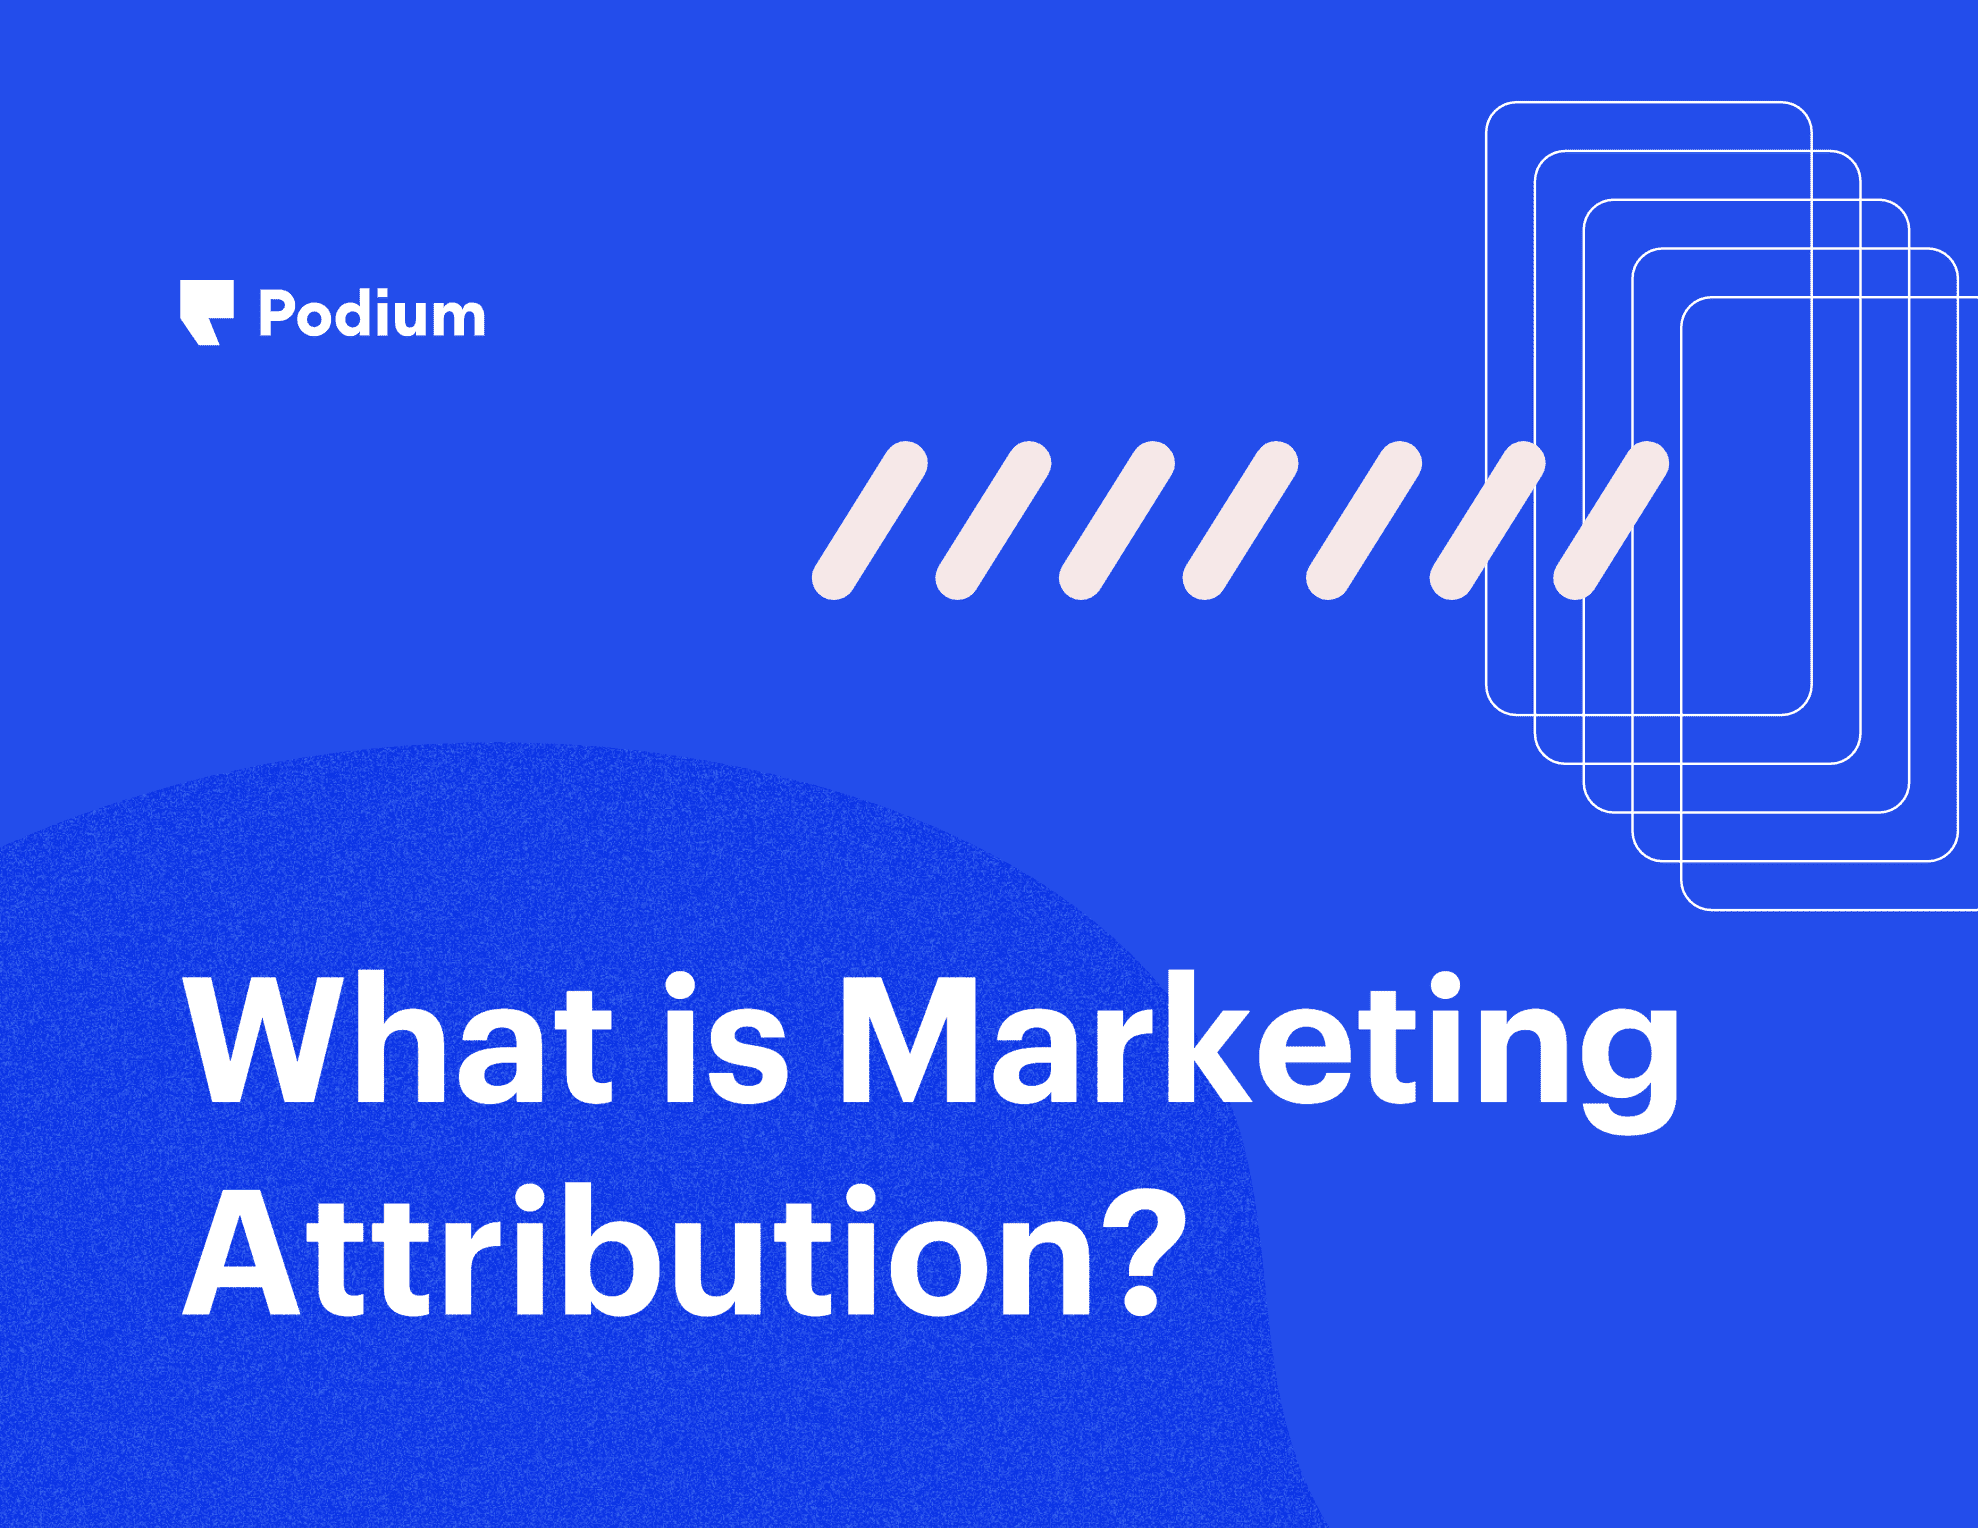 What is marketing attribution?